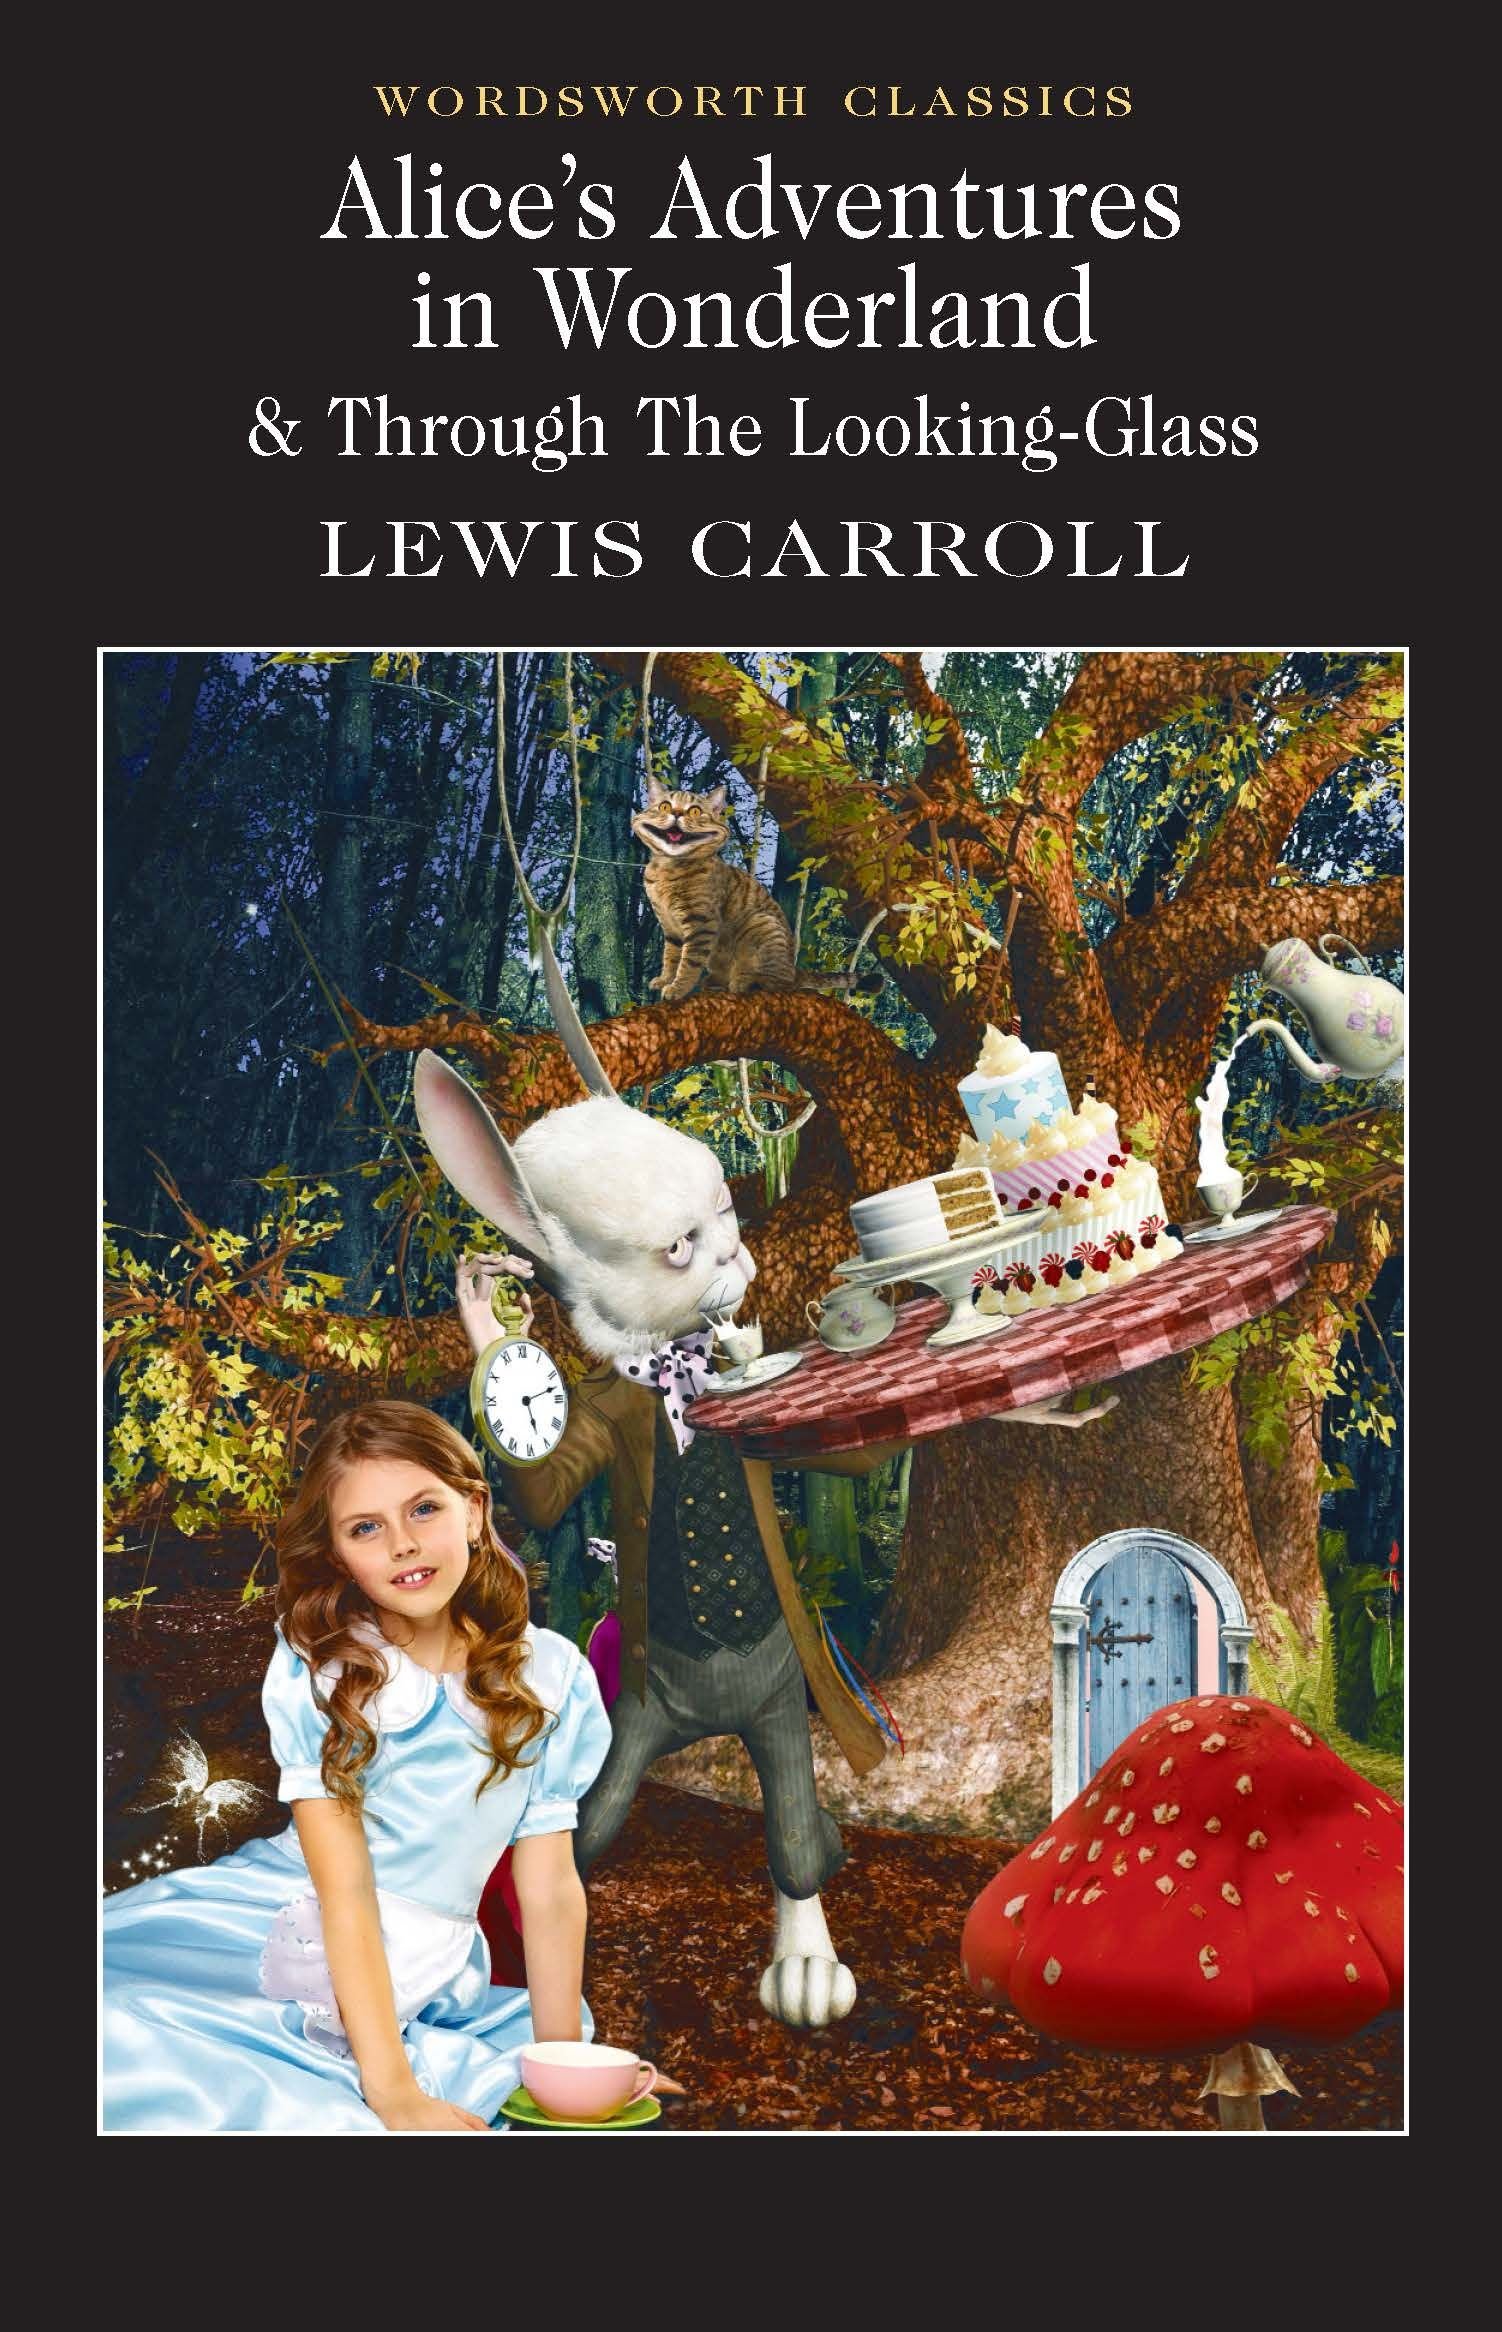 Adventures　Free　Buy　With　by　Alice's　Carroll　Lewis　in　Wonderland　Delivery